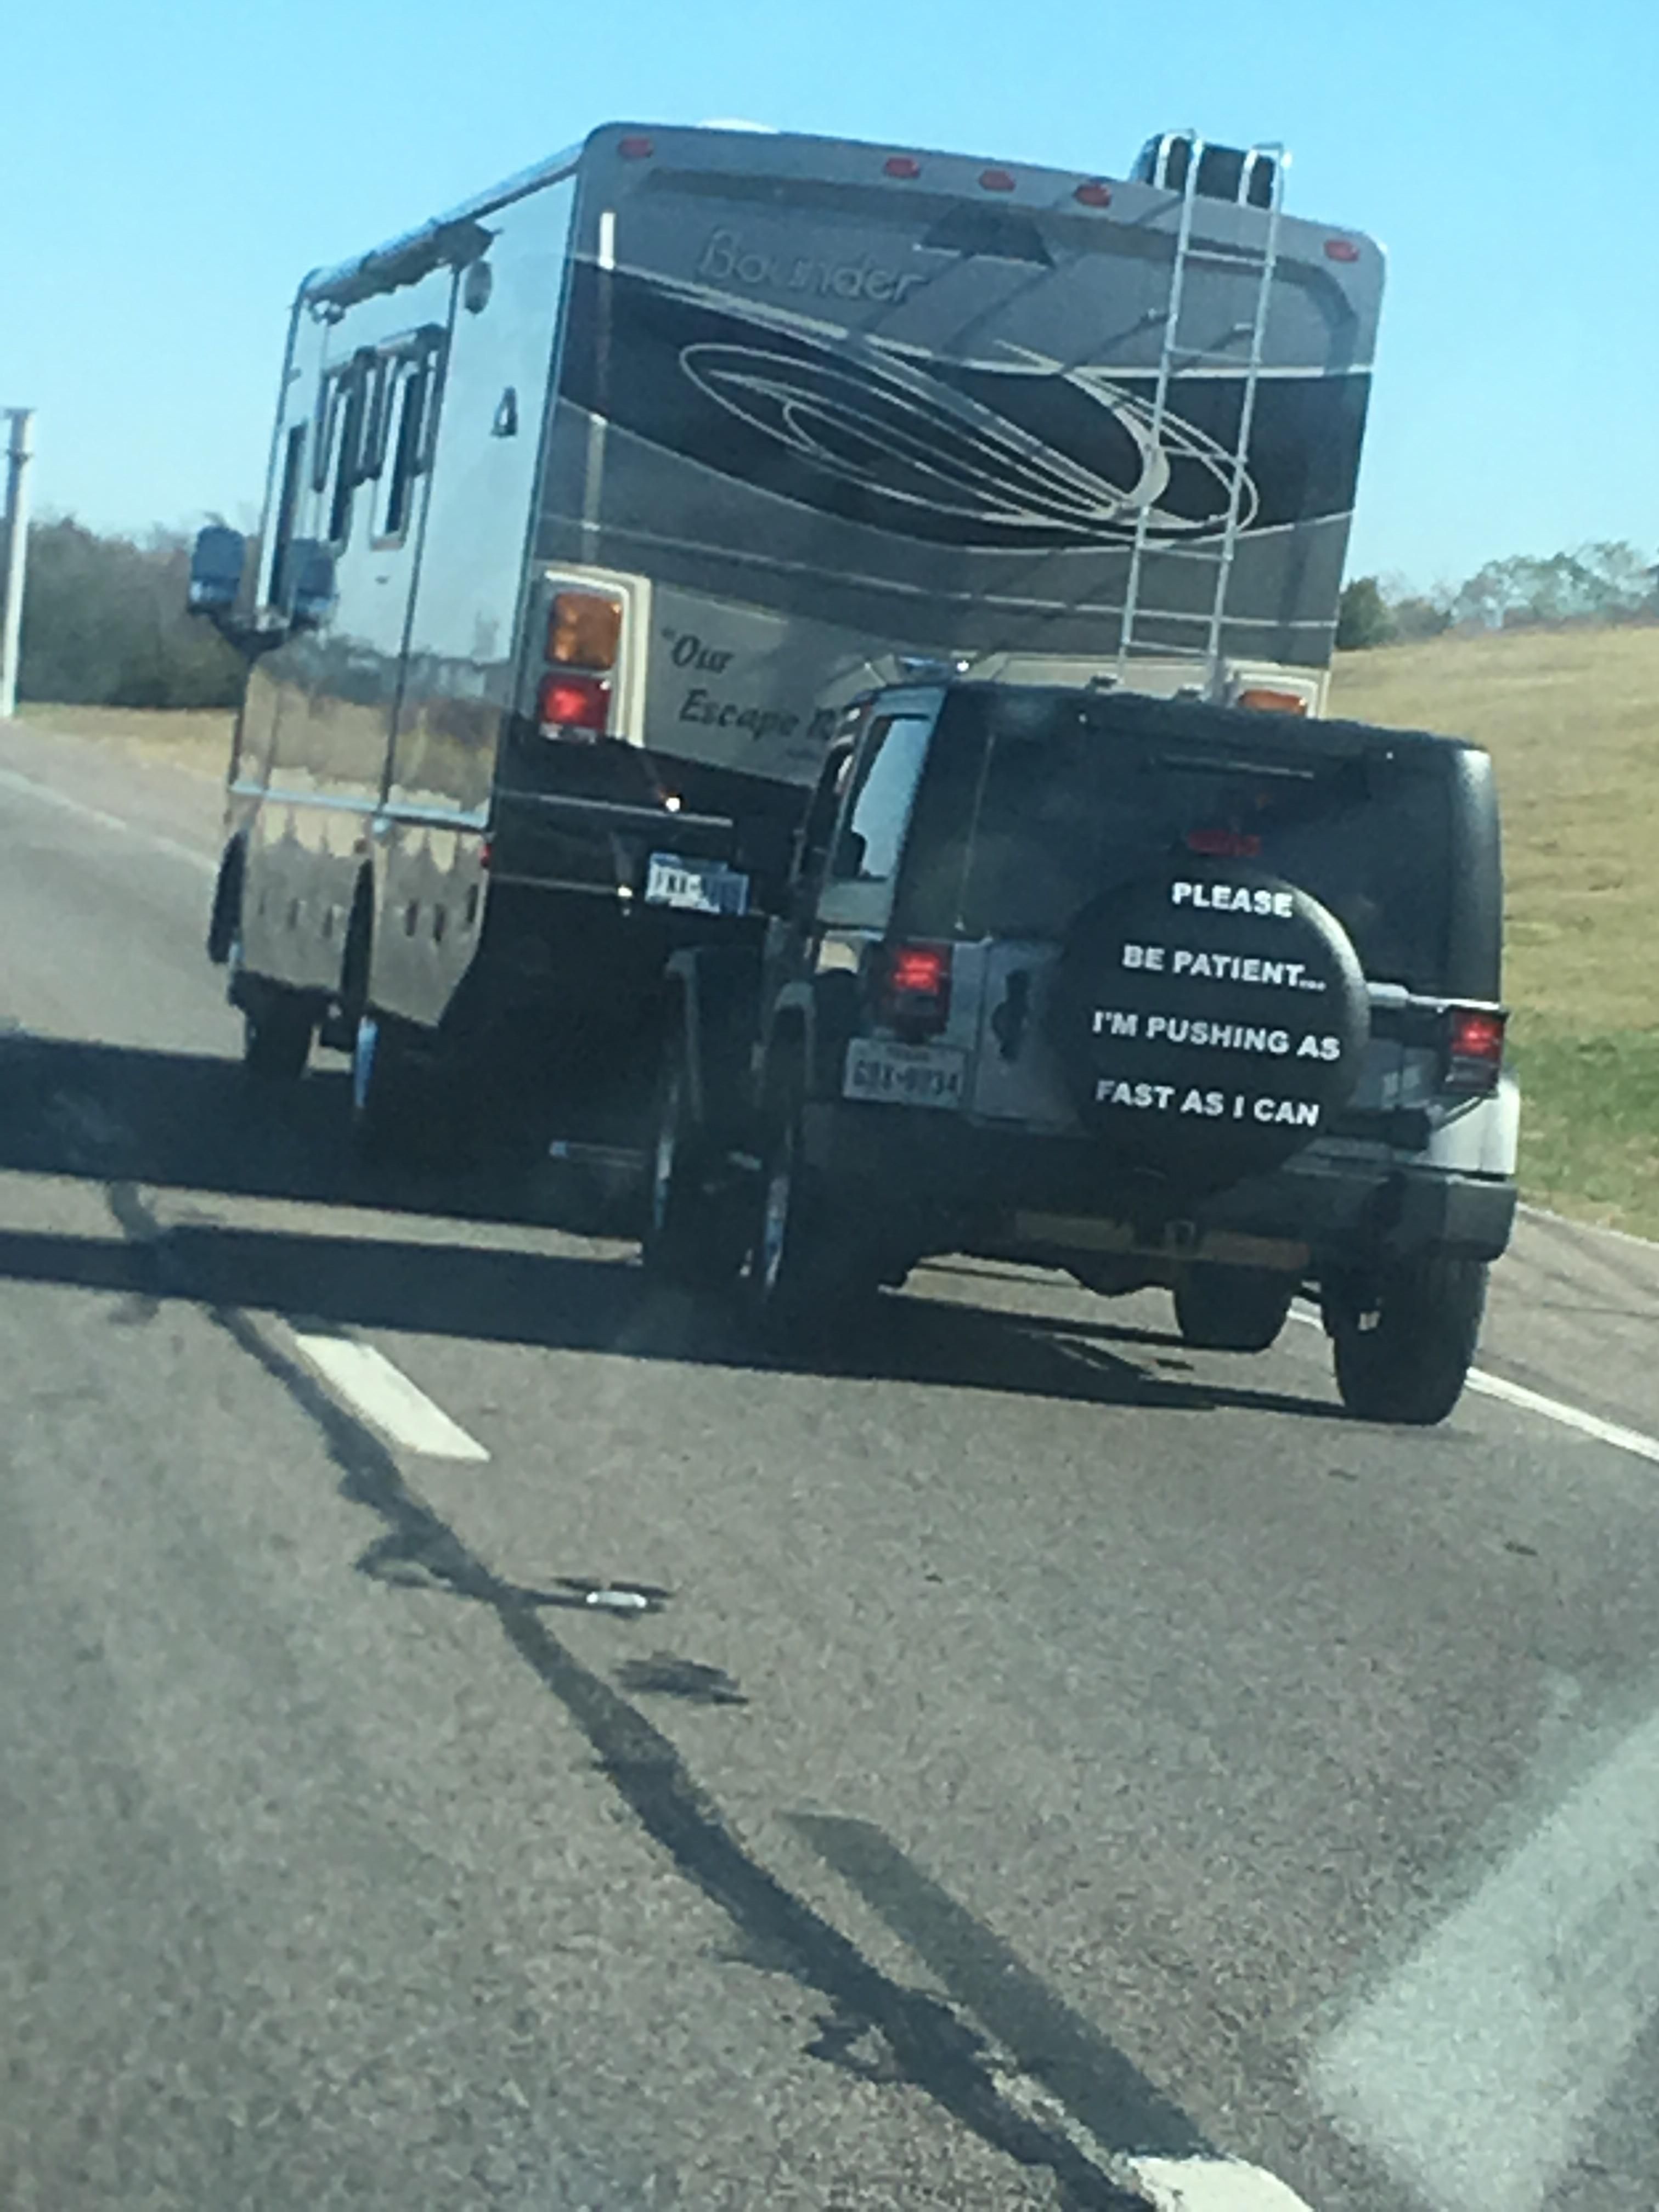 Saw this driving